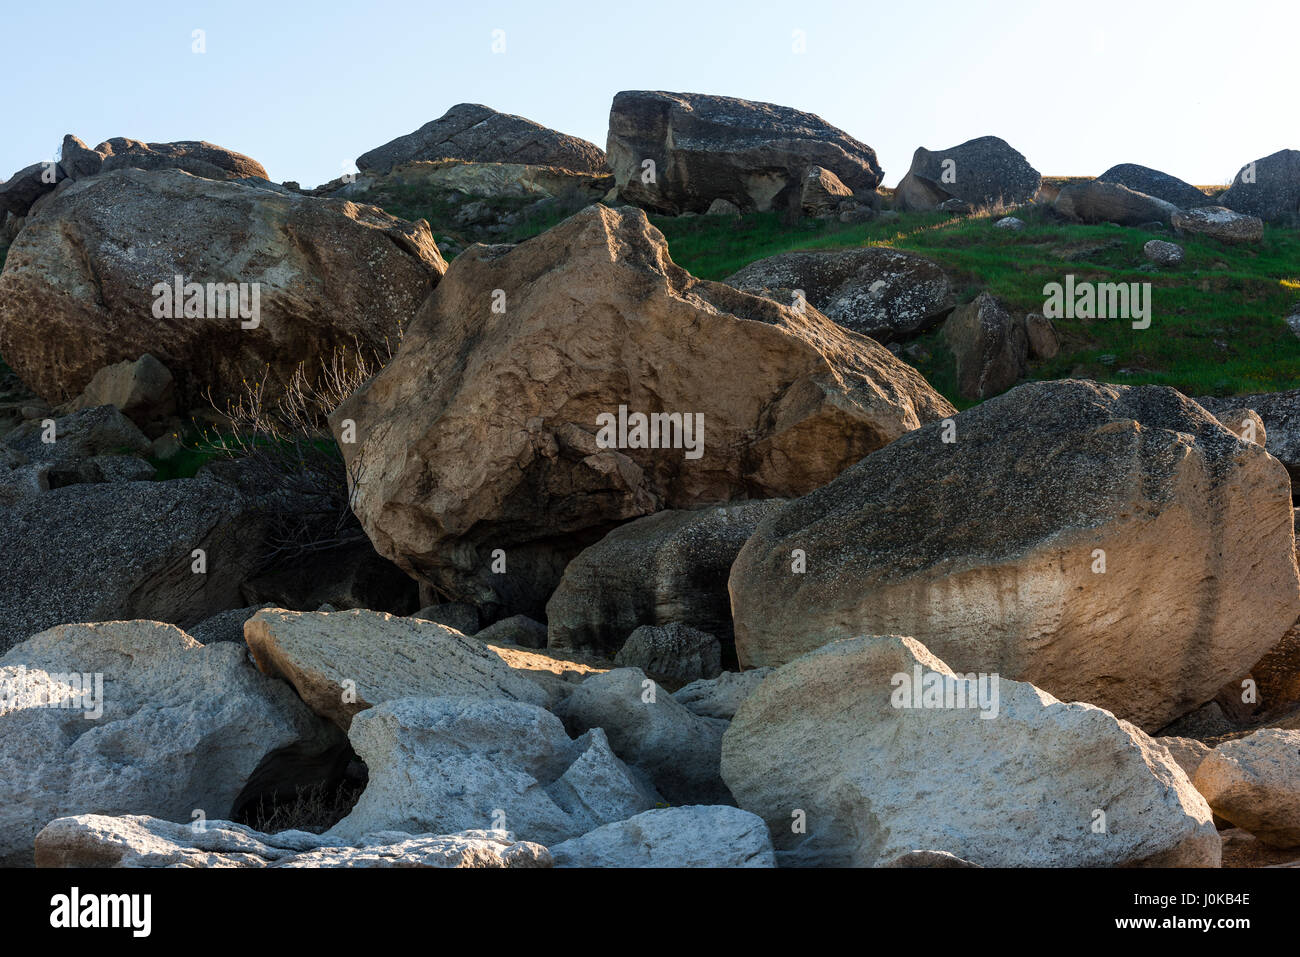 Pile Of Rocks Images – Browse 579,976 Stock Photos, Vectors, and